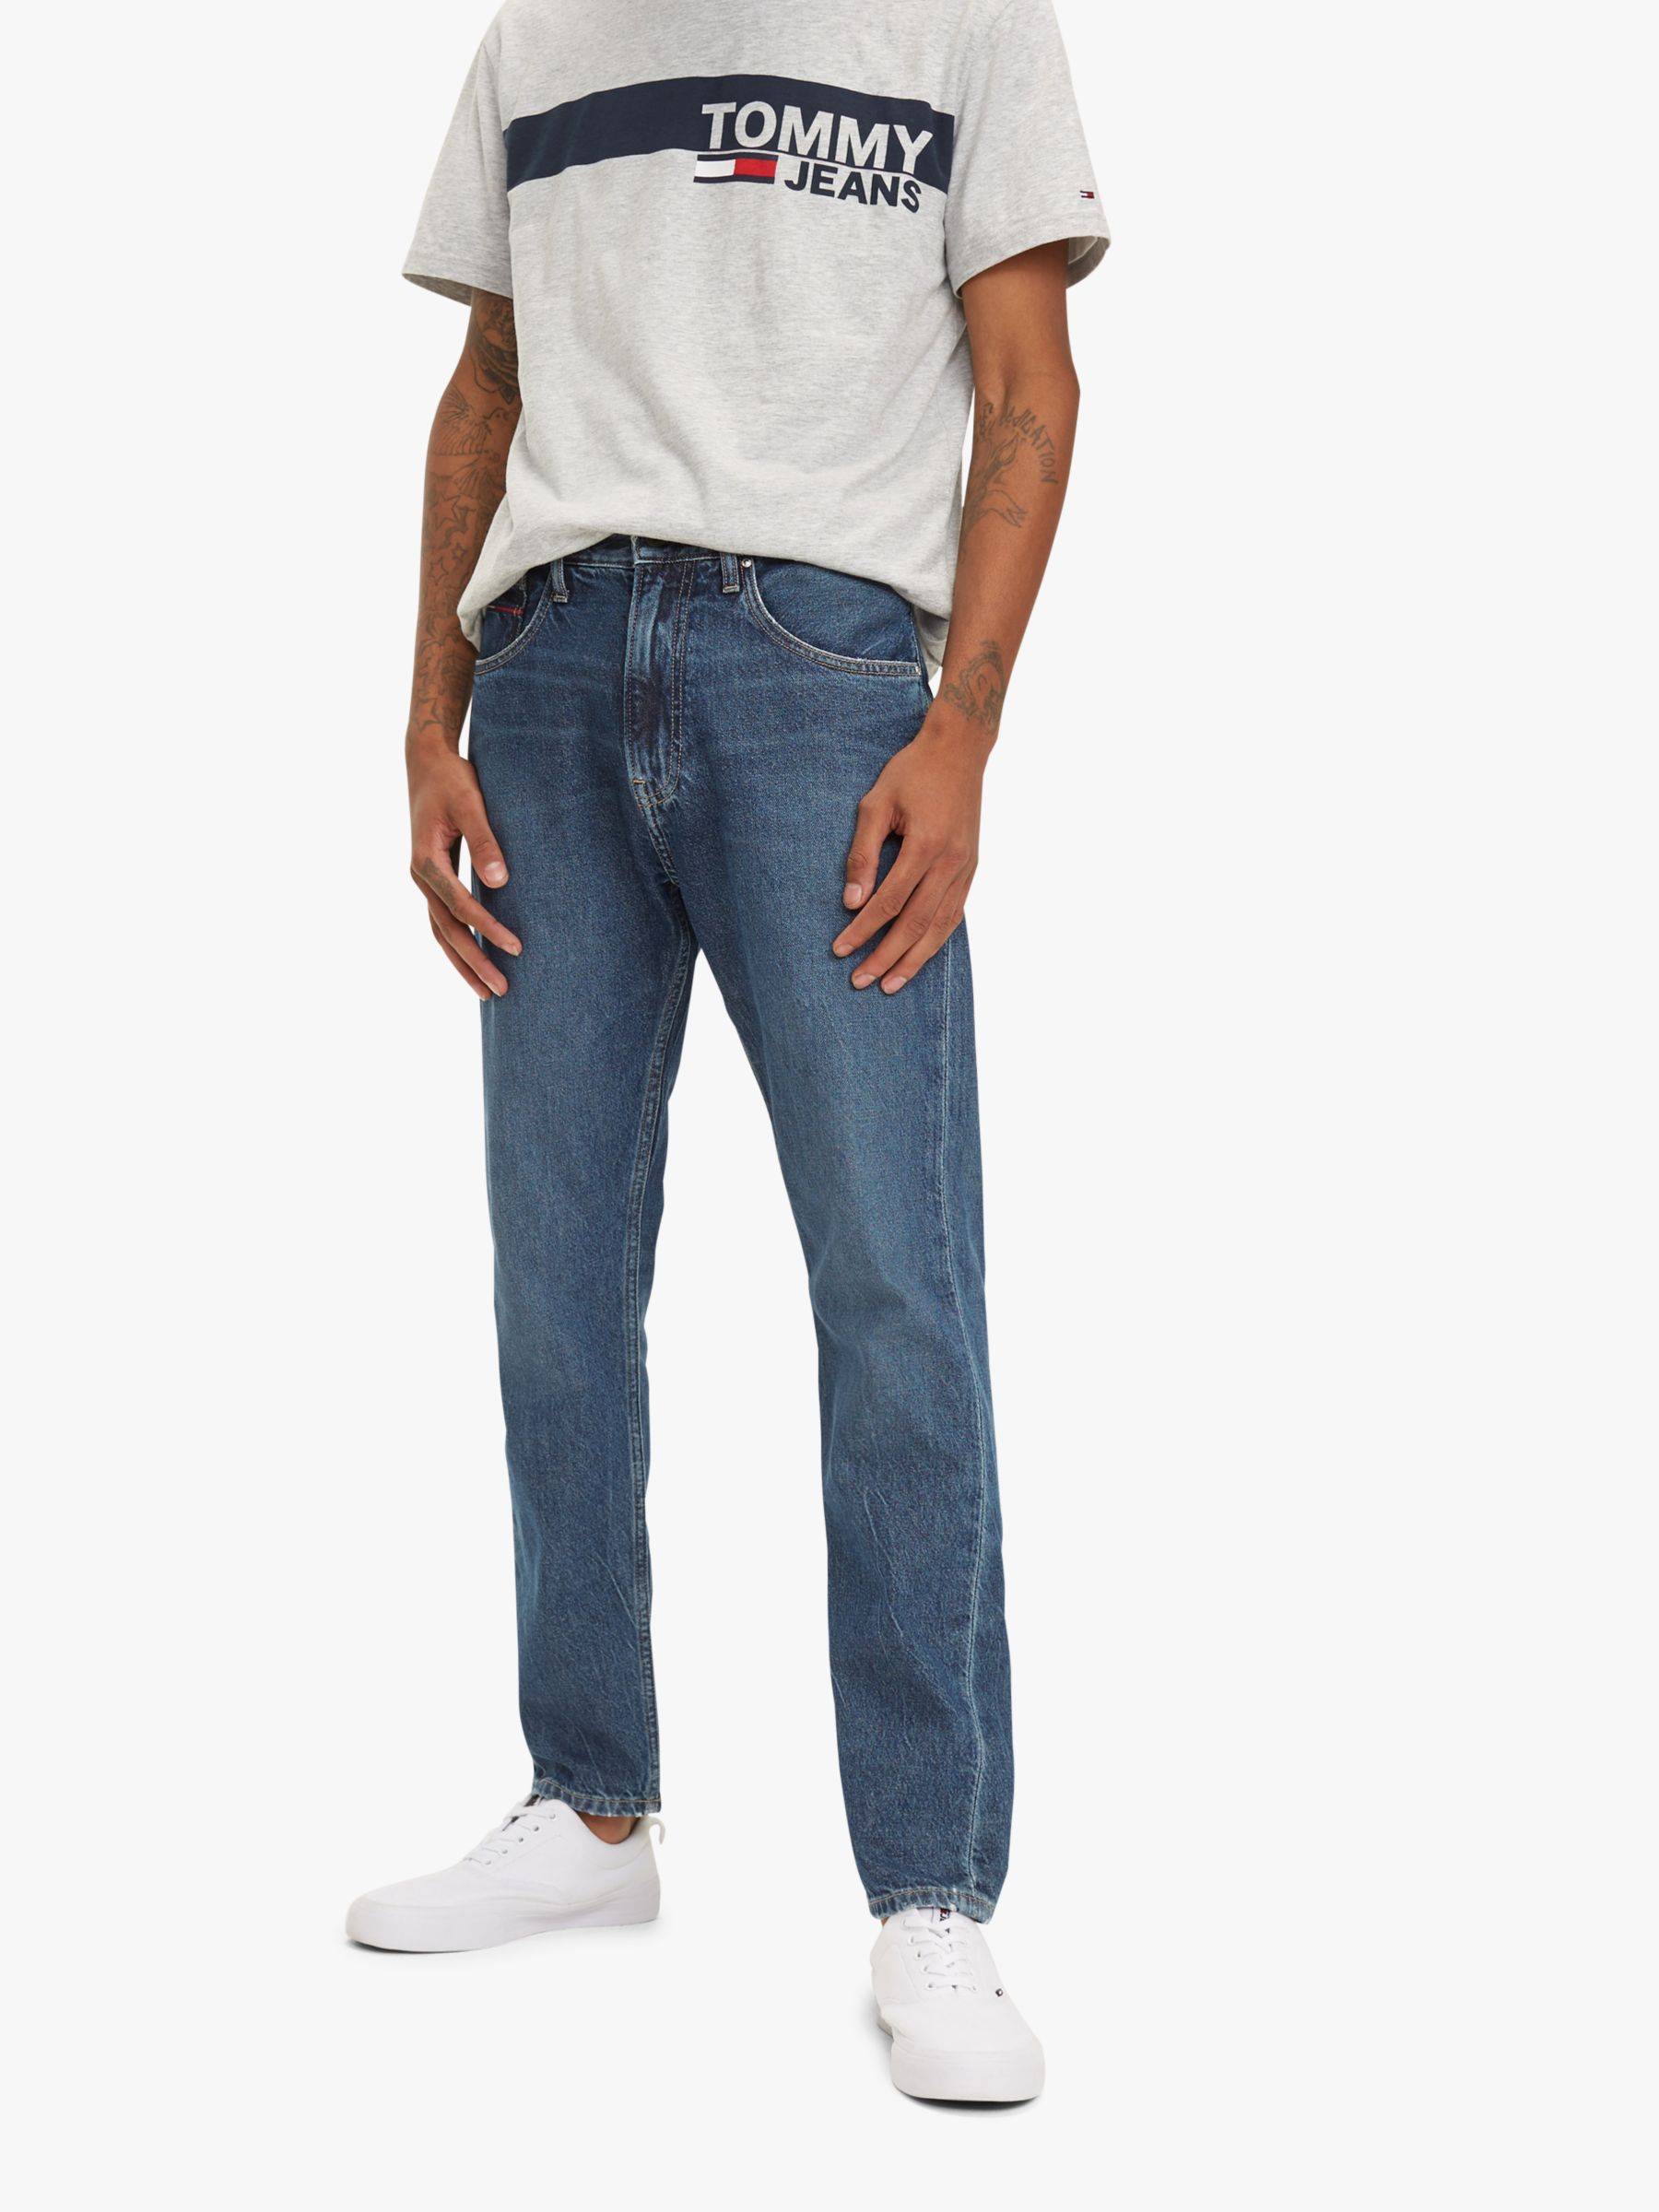 modern tapered jeans